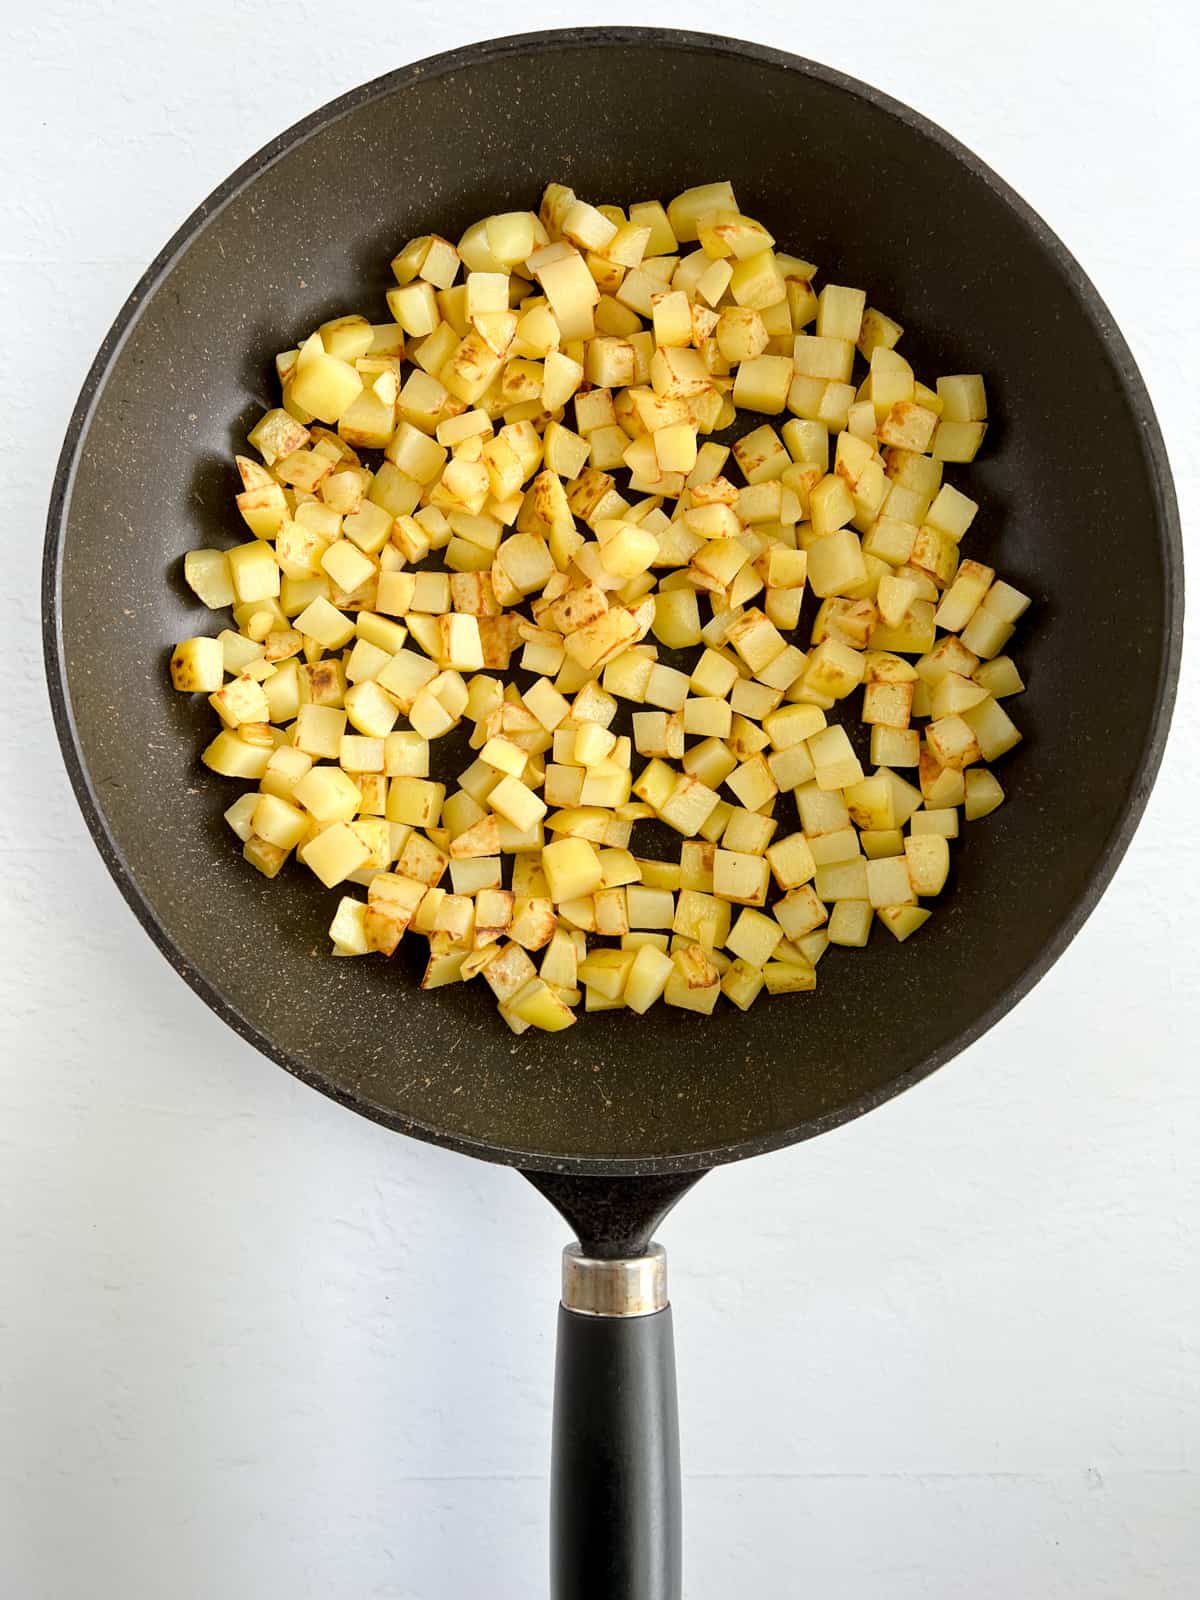 pan fried golden cubed potatoes in a black fry pan